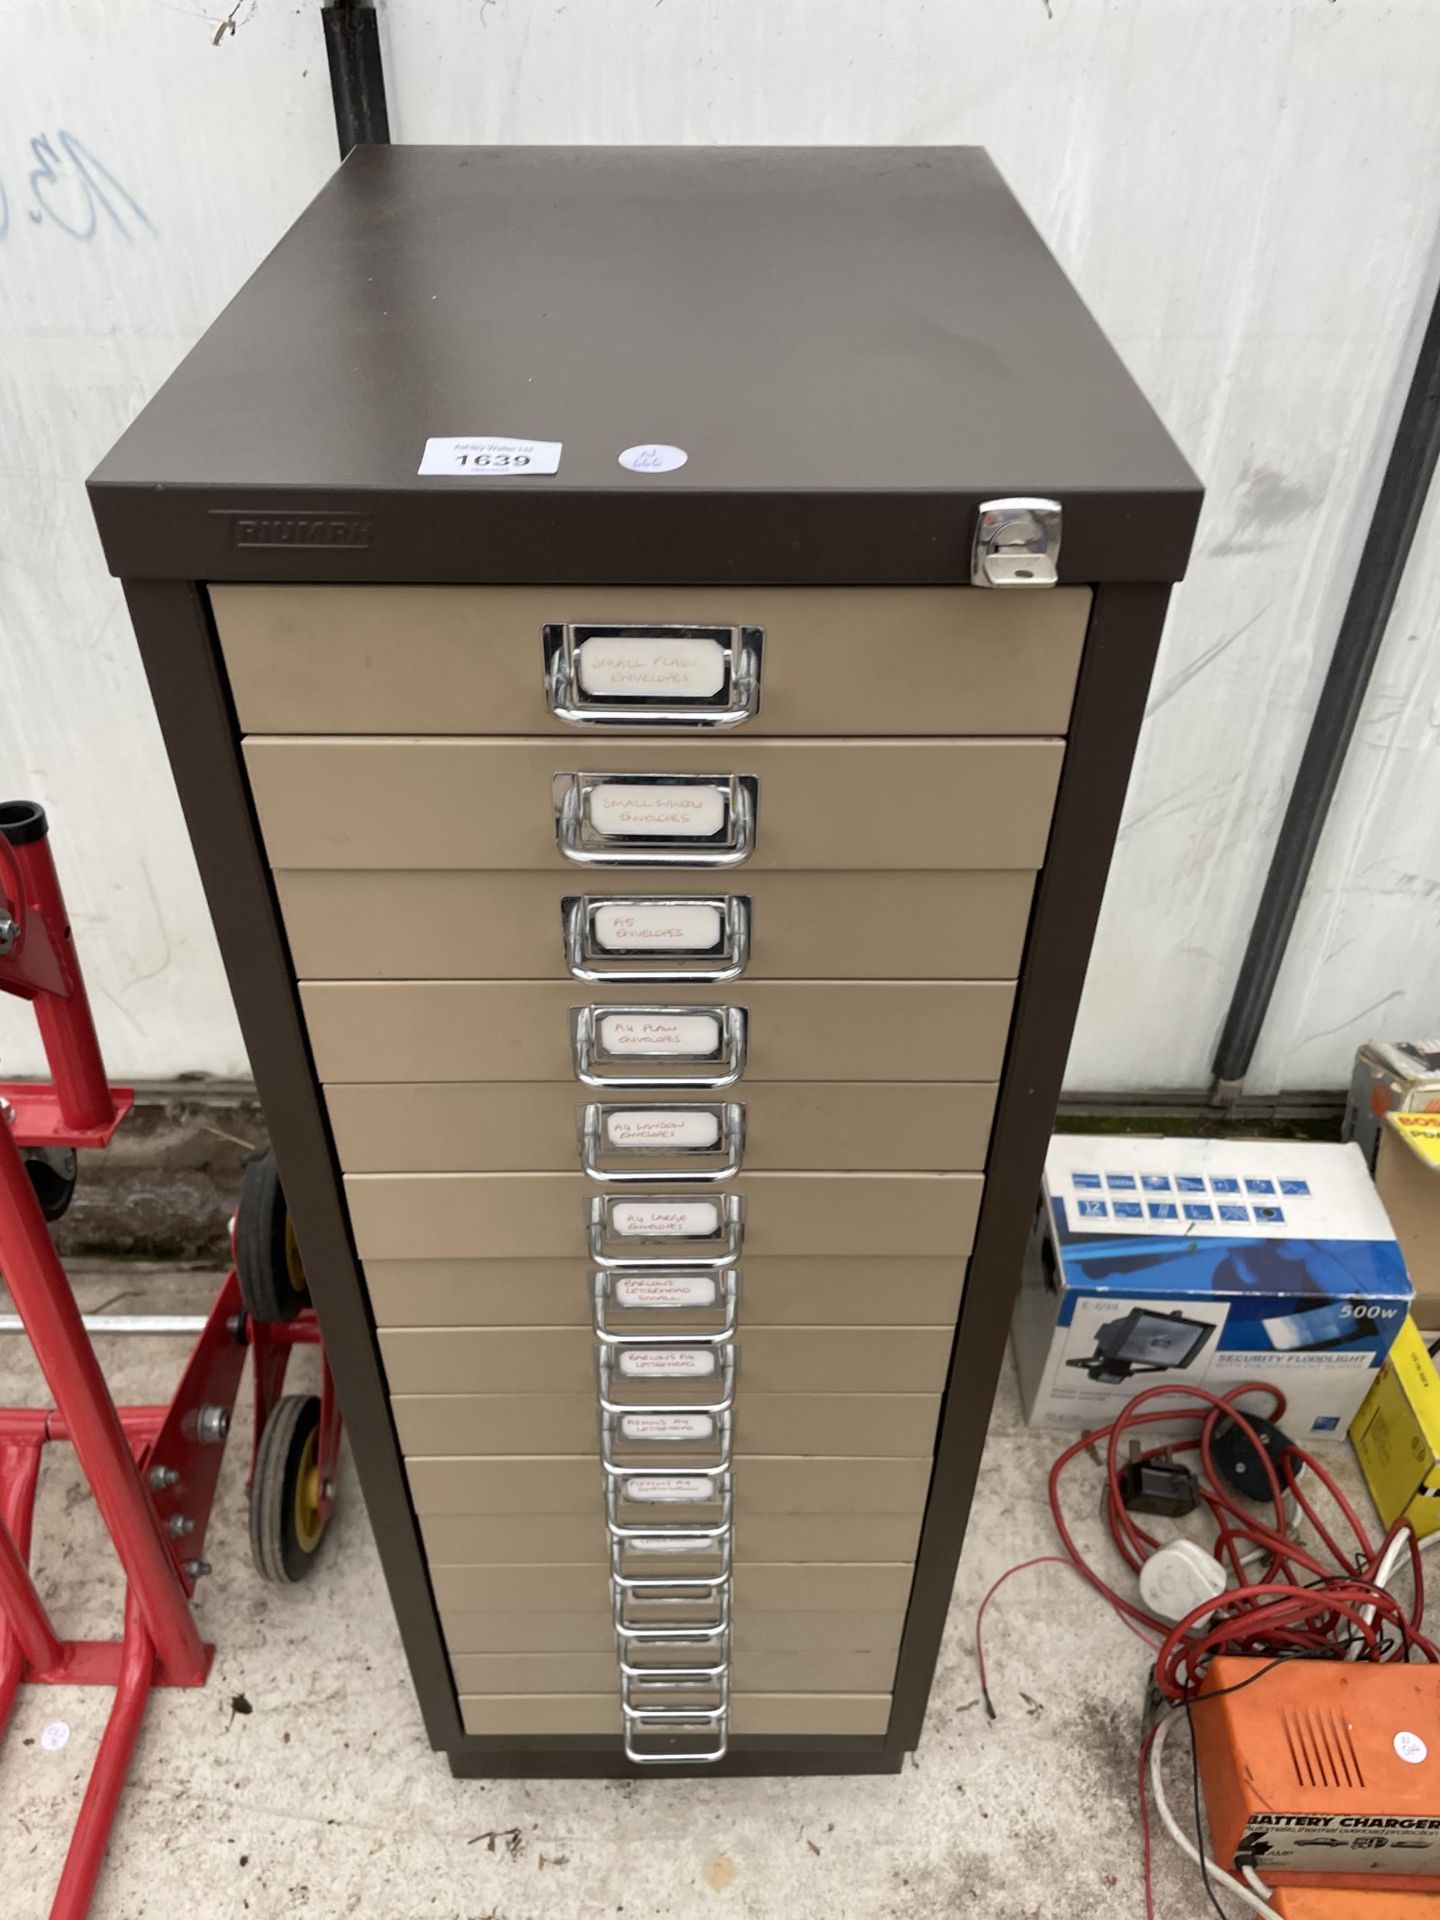 A TRIUMPH 15 DRAWER MINIATURE FILING CABINET COMPLETE WITH KEY